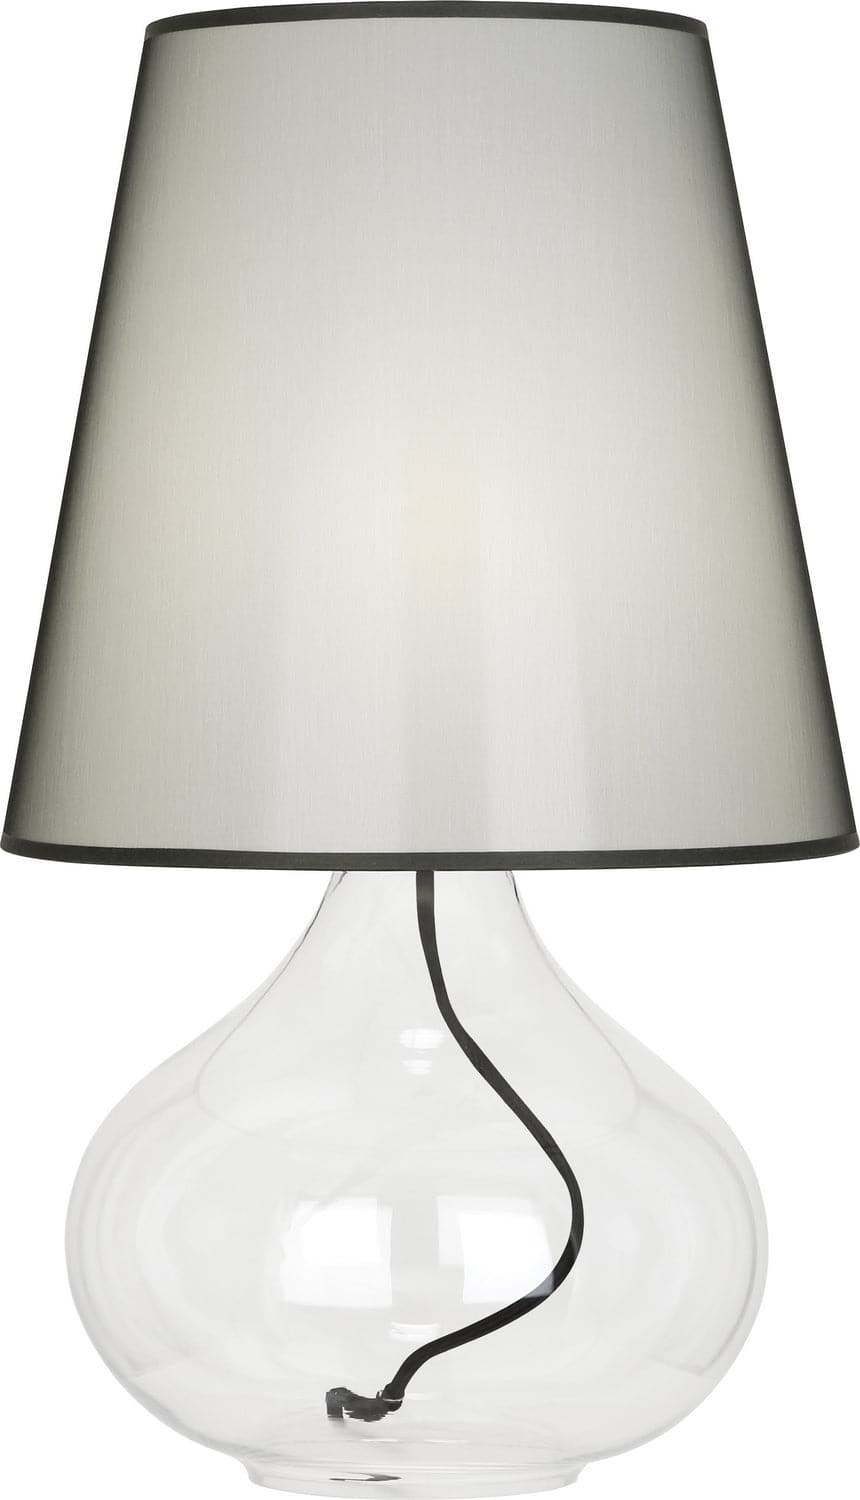 Robert Abbey - 458B - One Light Table Lamp - June - Clear Glass Body w/Black Fabric Wrapped Cord